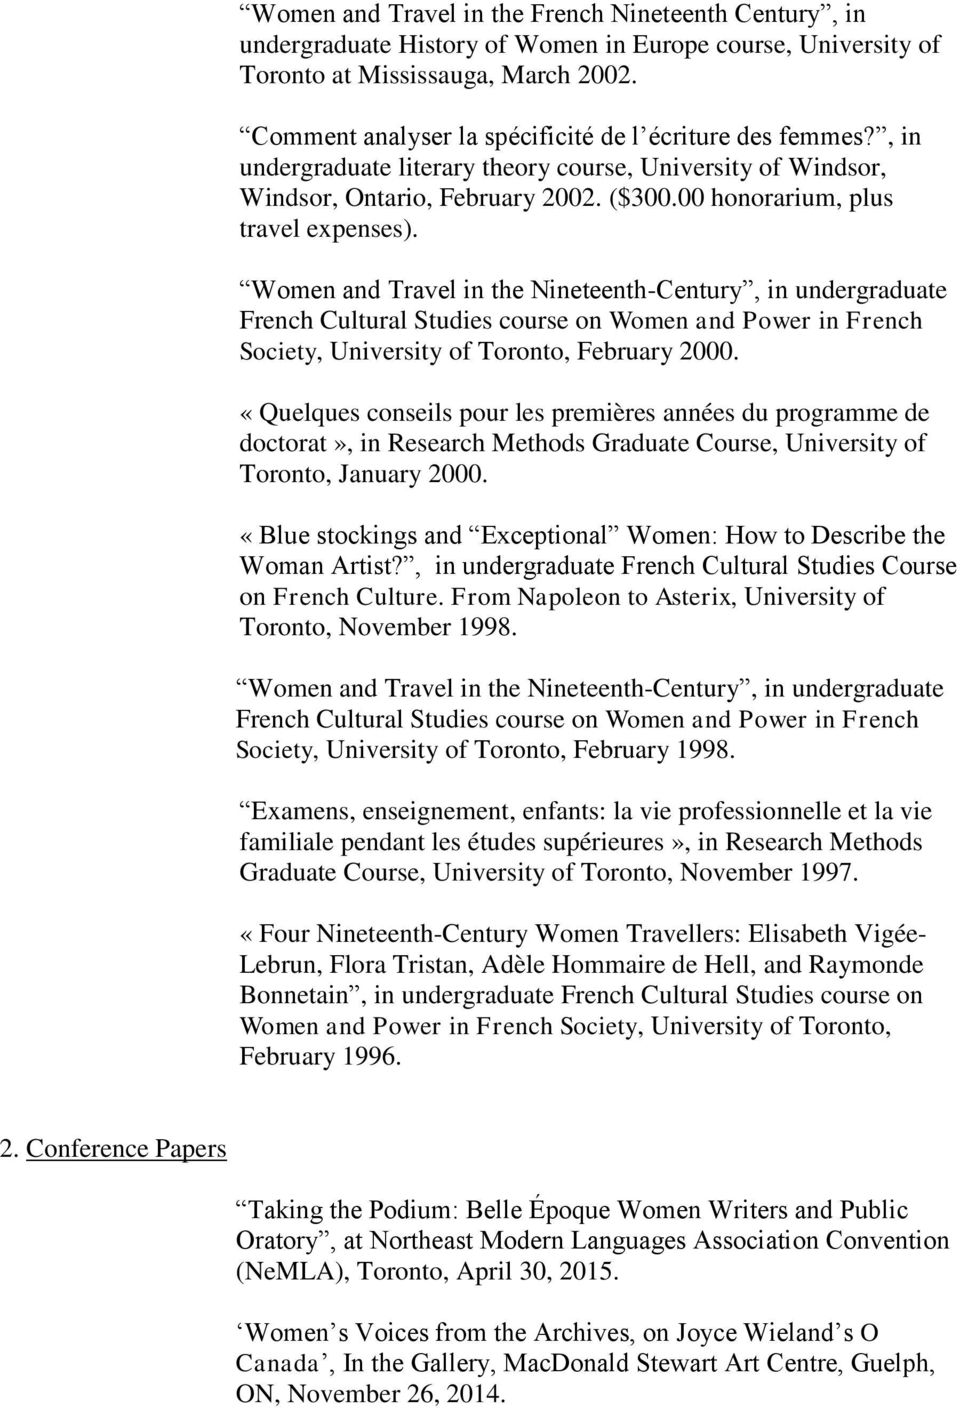 Women and Travel in the Nineteenth-Century, in undergraduate French Cultural Studies course on Women and Power in French Society, University of Toronto, February 2000.